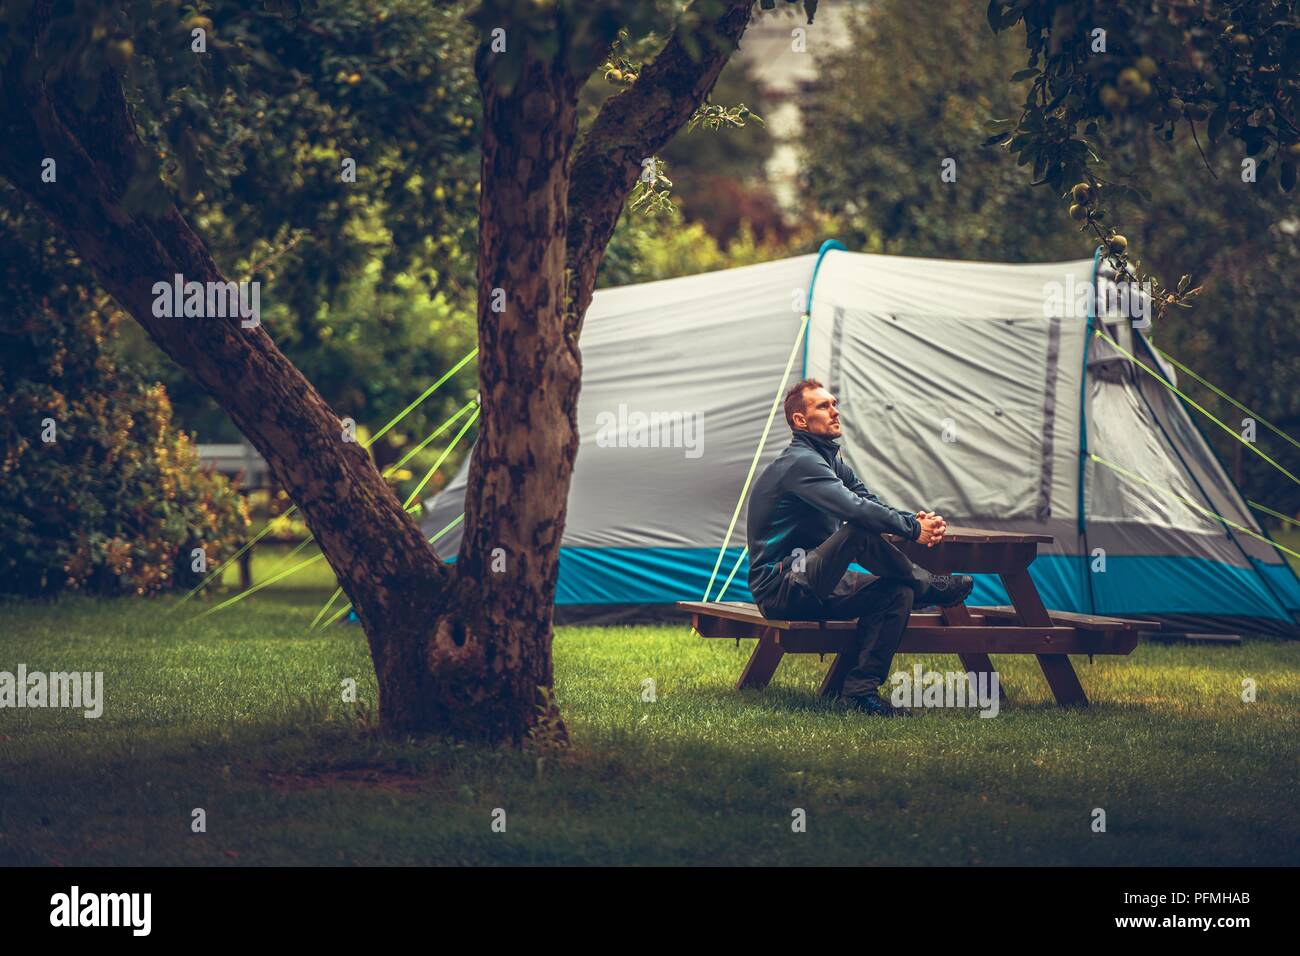 Summer Tent Camping Relax. Caucasian Men Relaxing on Wooden Bench in Front of His Tent. Campsite Theme. Stock Photo